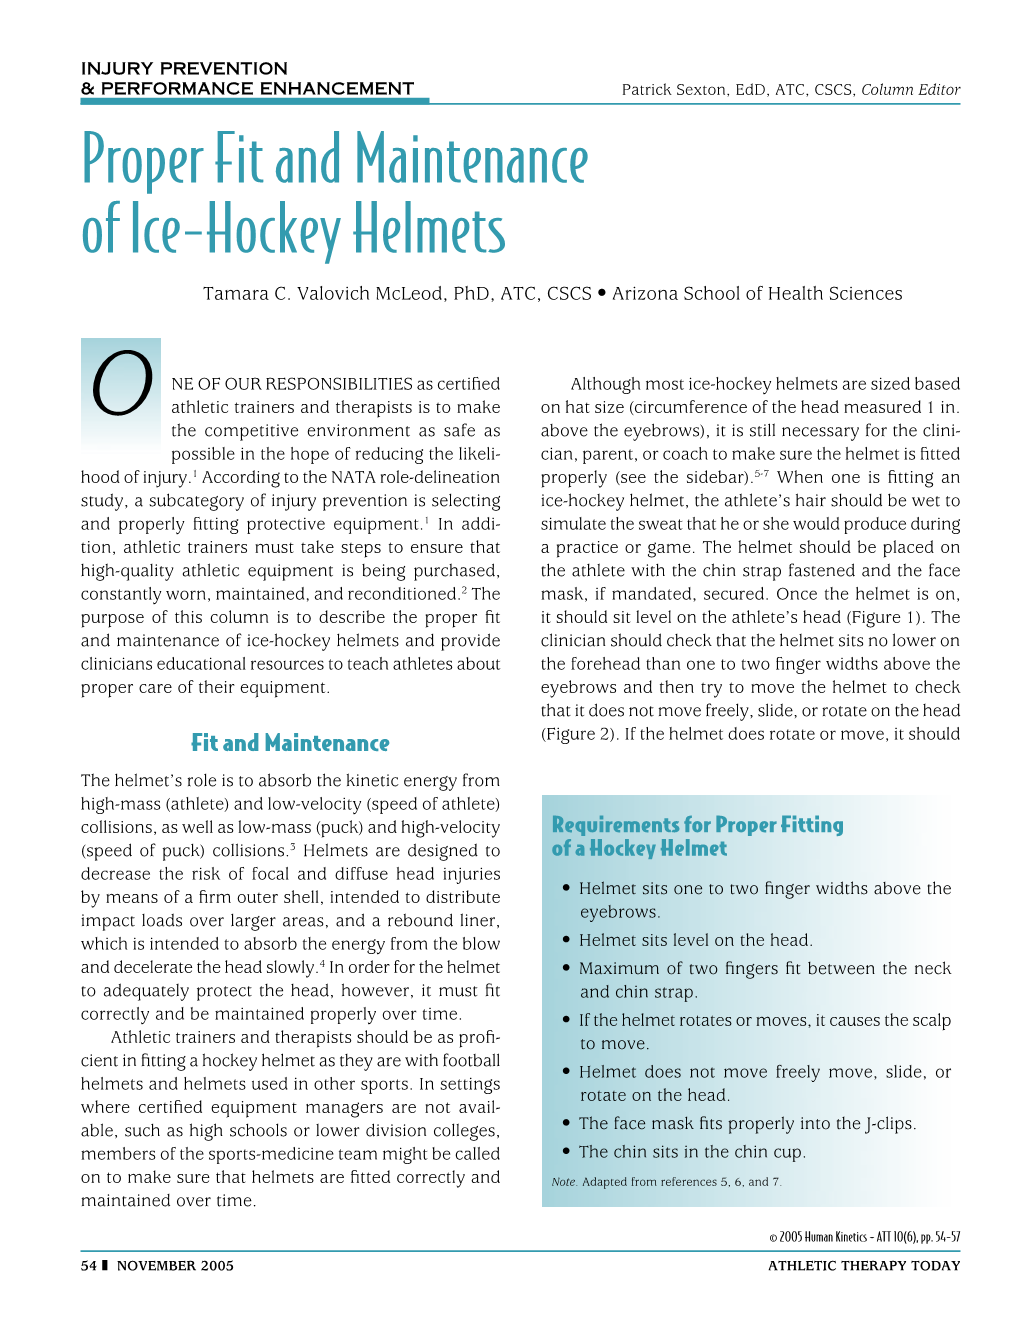 Proper Fit and Maintenance of Ice-Hockey Helmets